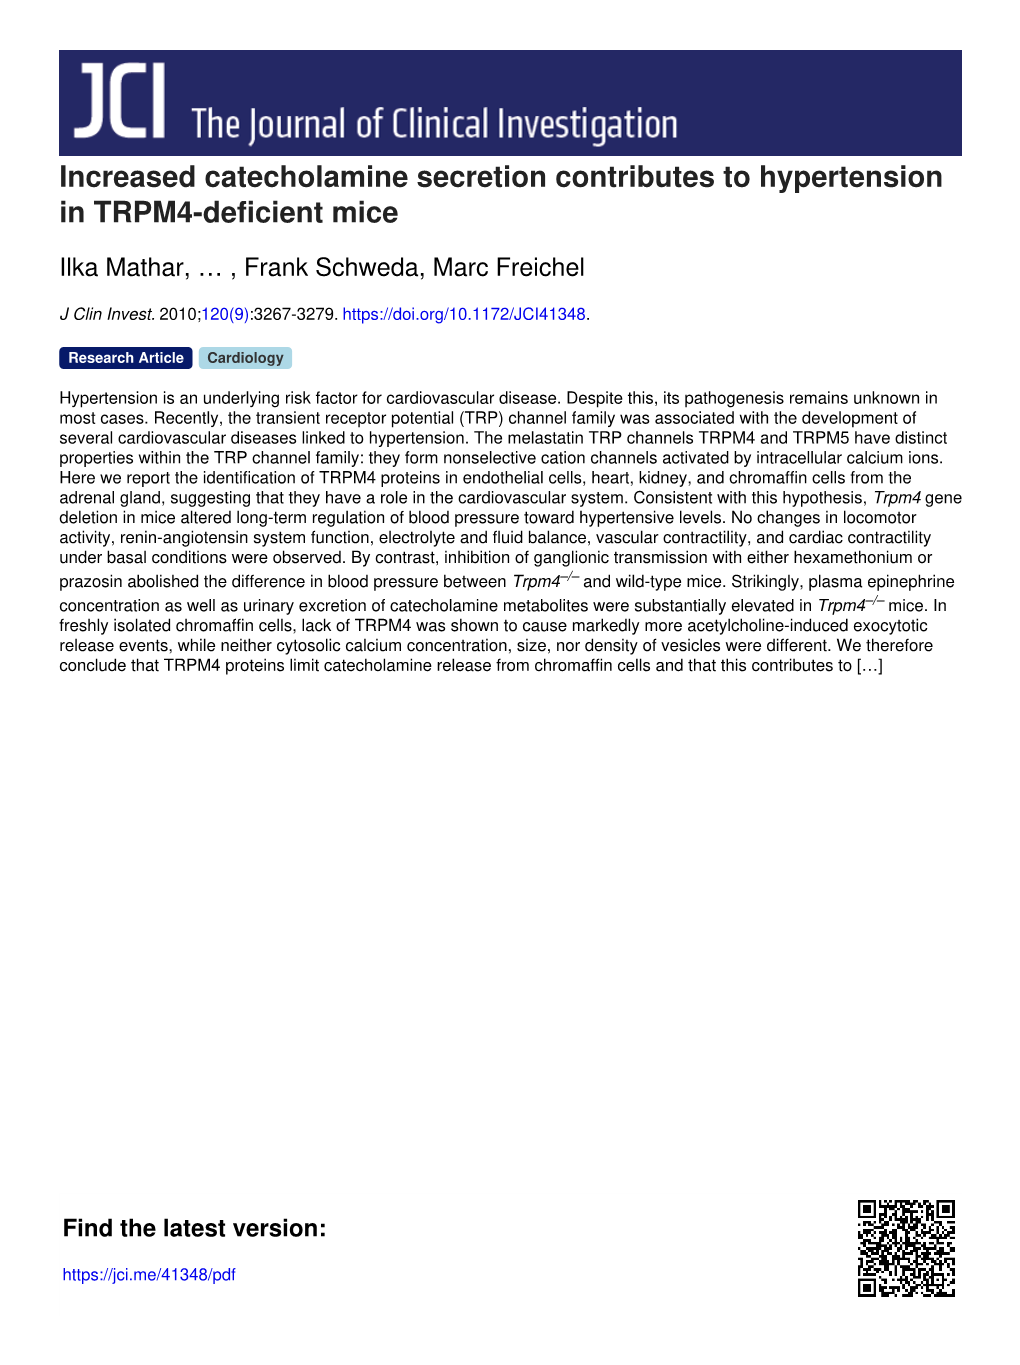 Increased Catecholamine Secretion Contributes to Hypertension in TRPM4-Deficient Mice